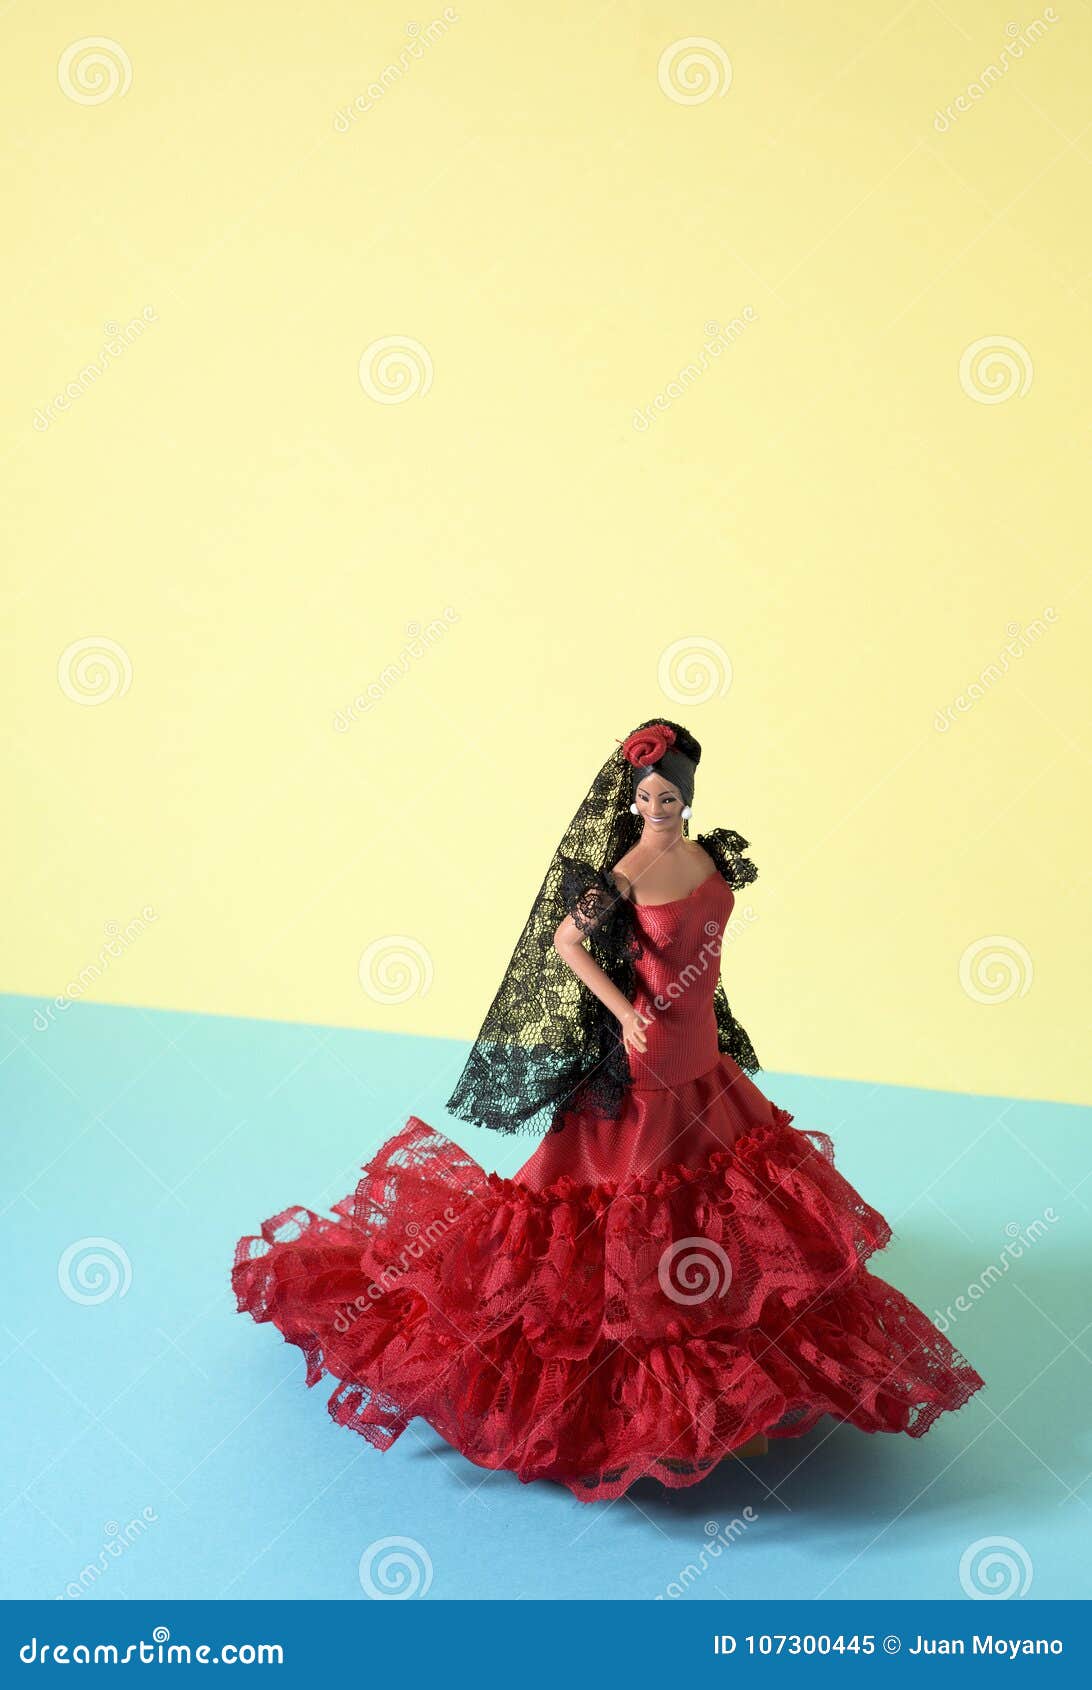 spanish doll dressed as a typical flamenco dancer